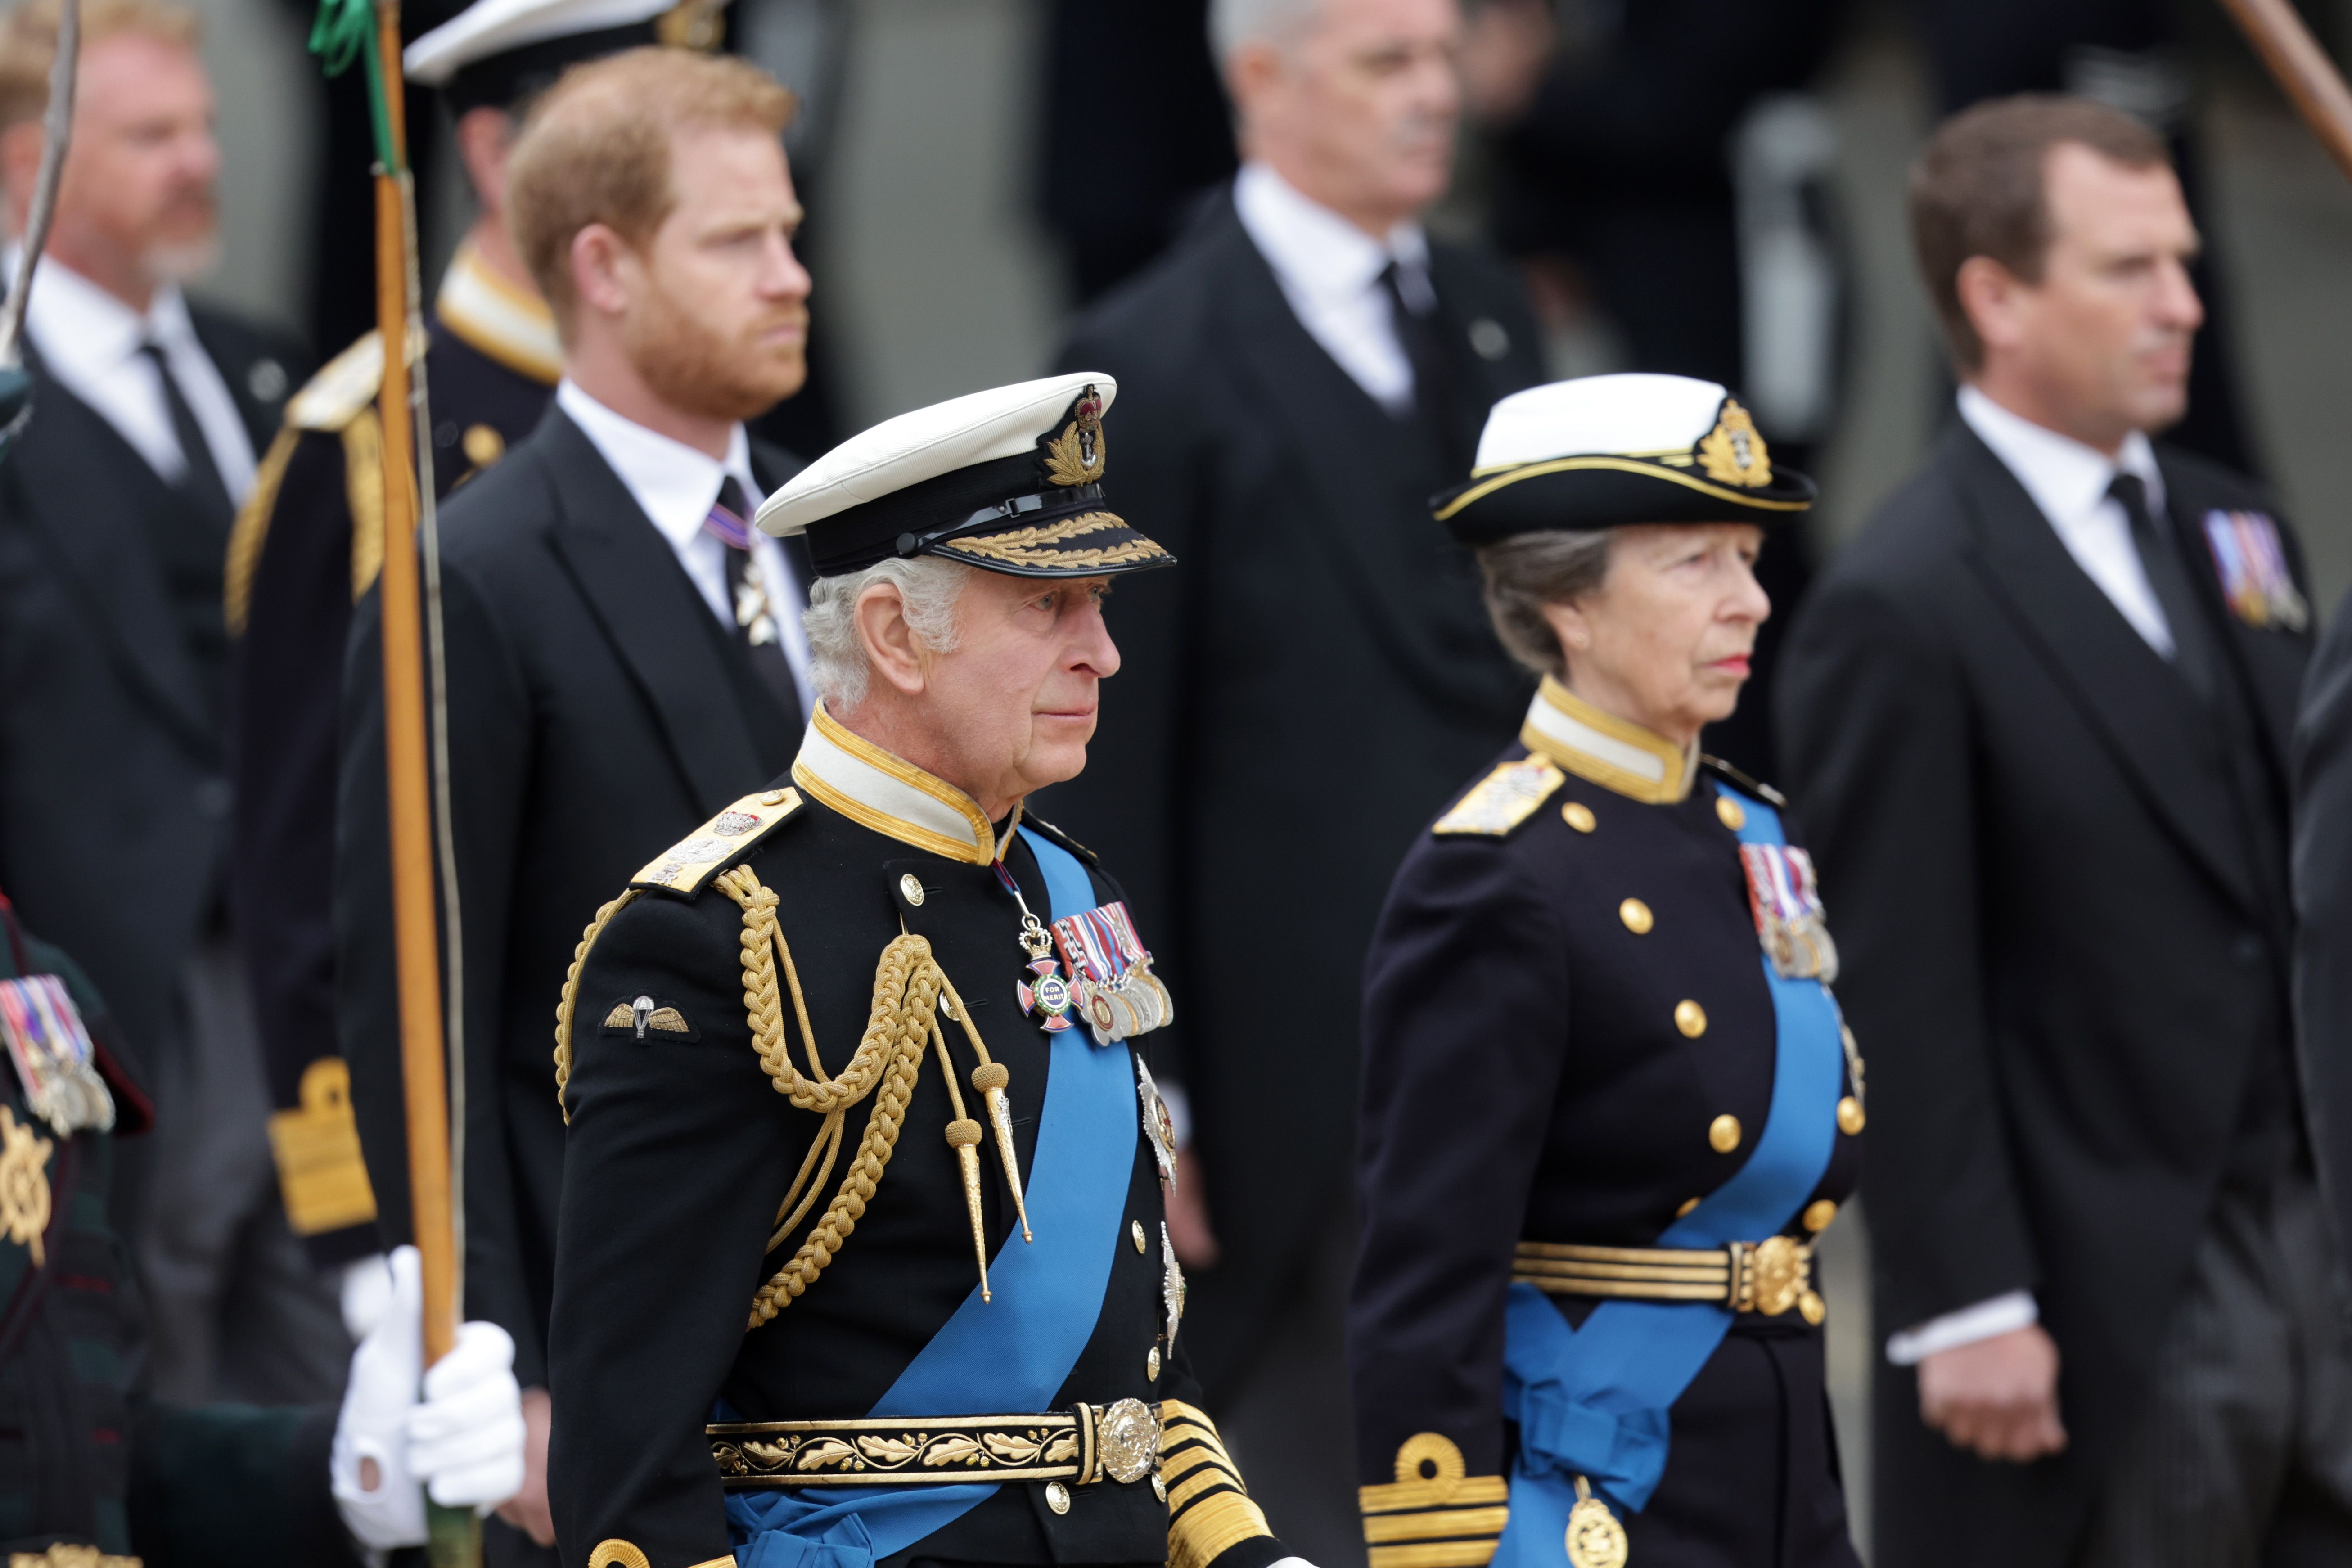  King Charles III and Princess Anne arrive at Westminster Abbey.